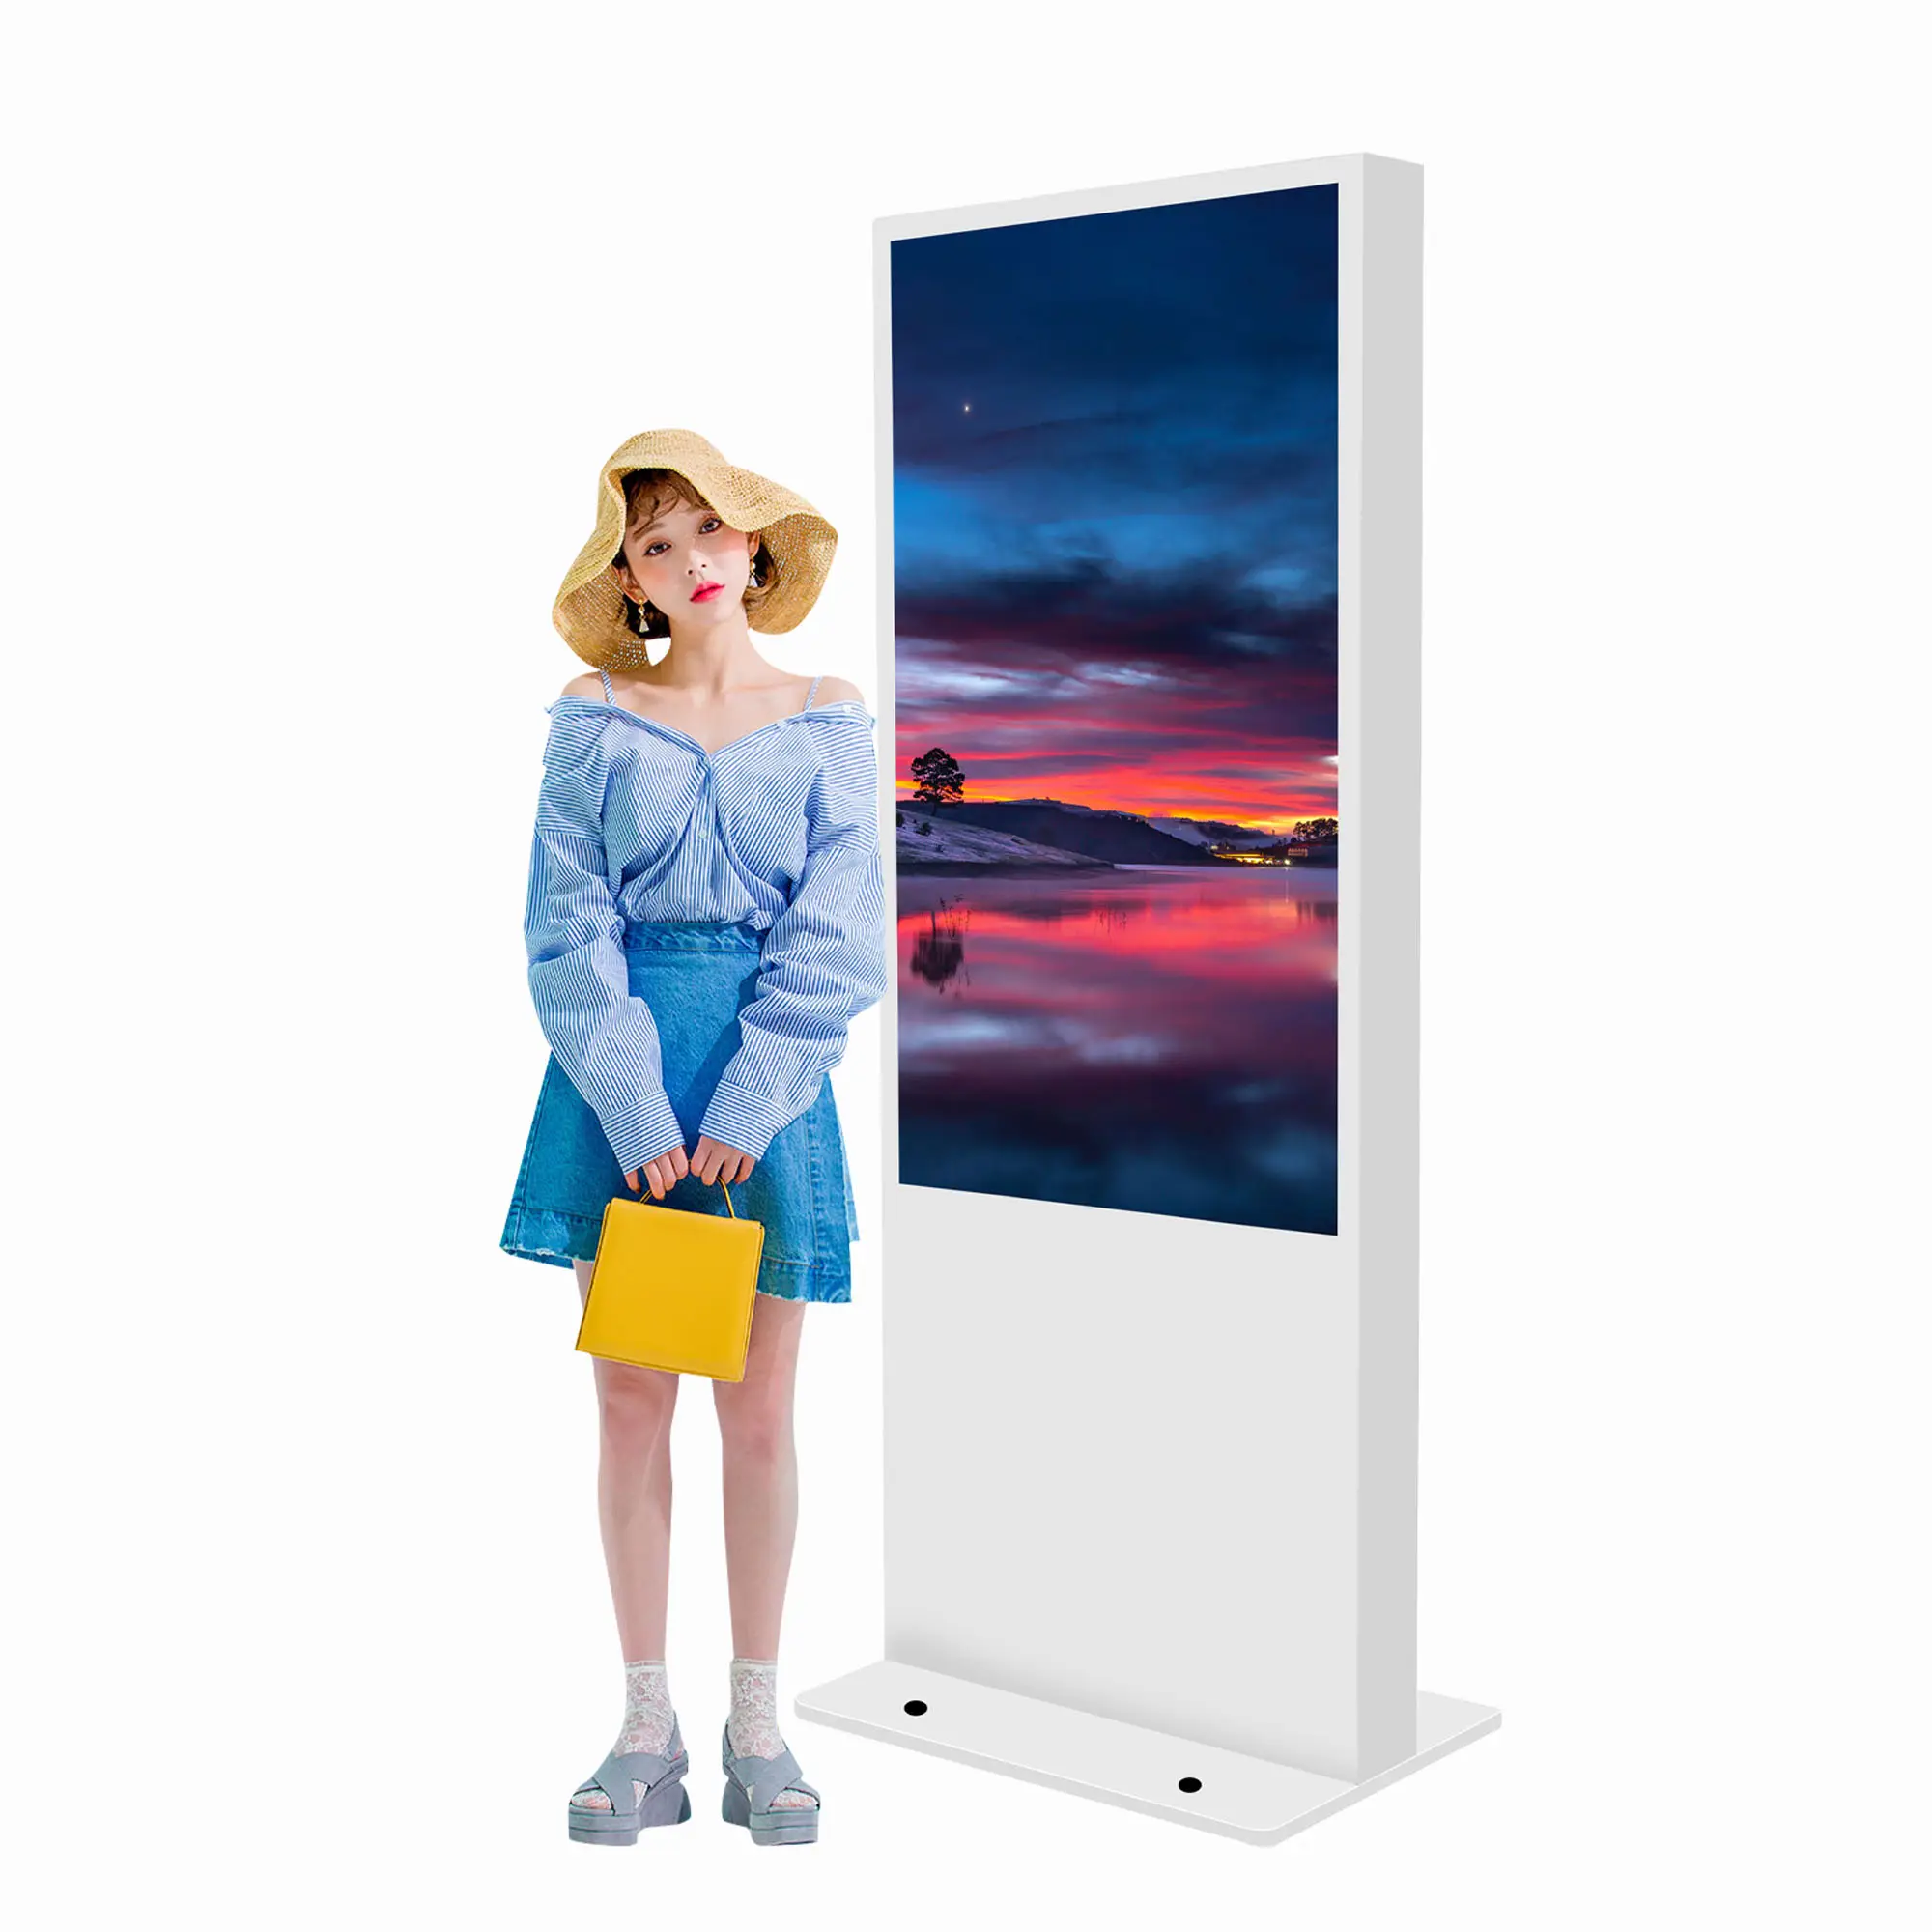 Lcd 55 Inch Digital Frame Ultra High Vertical Advertising Machine Touch Screen Display China Tv Price